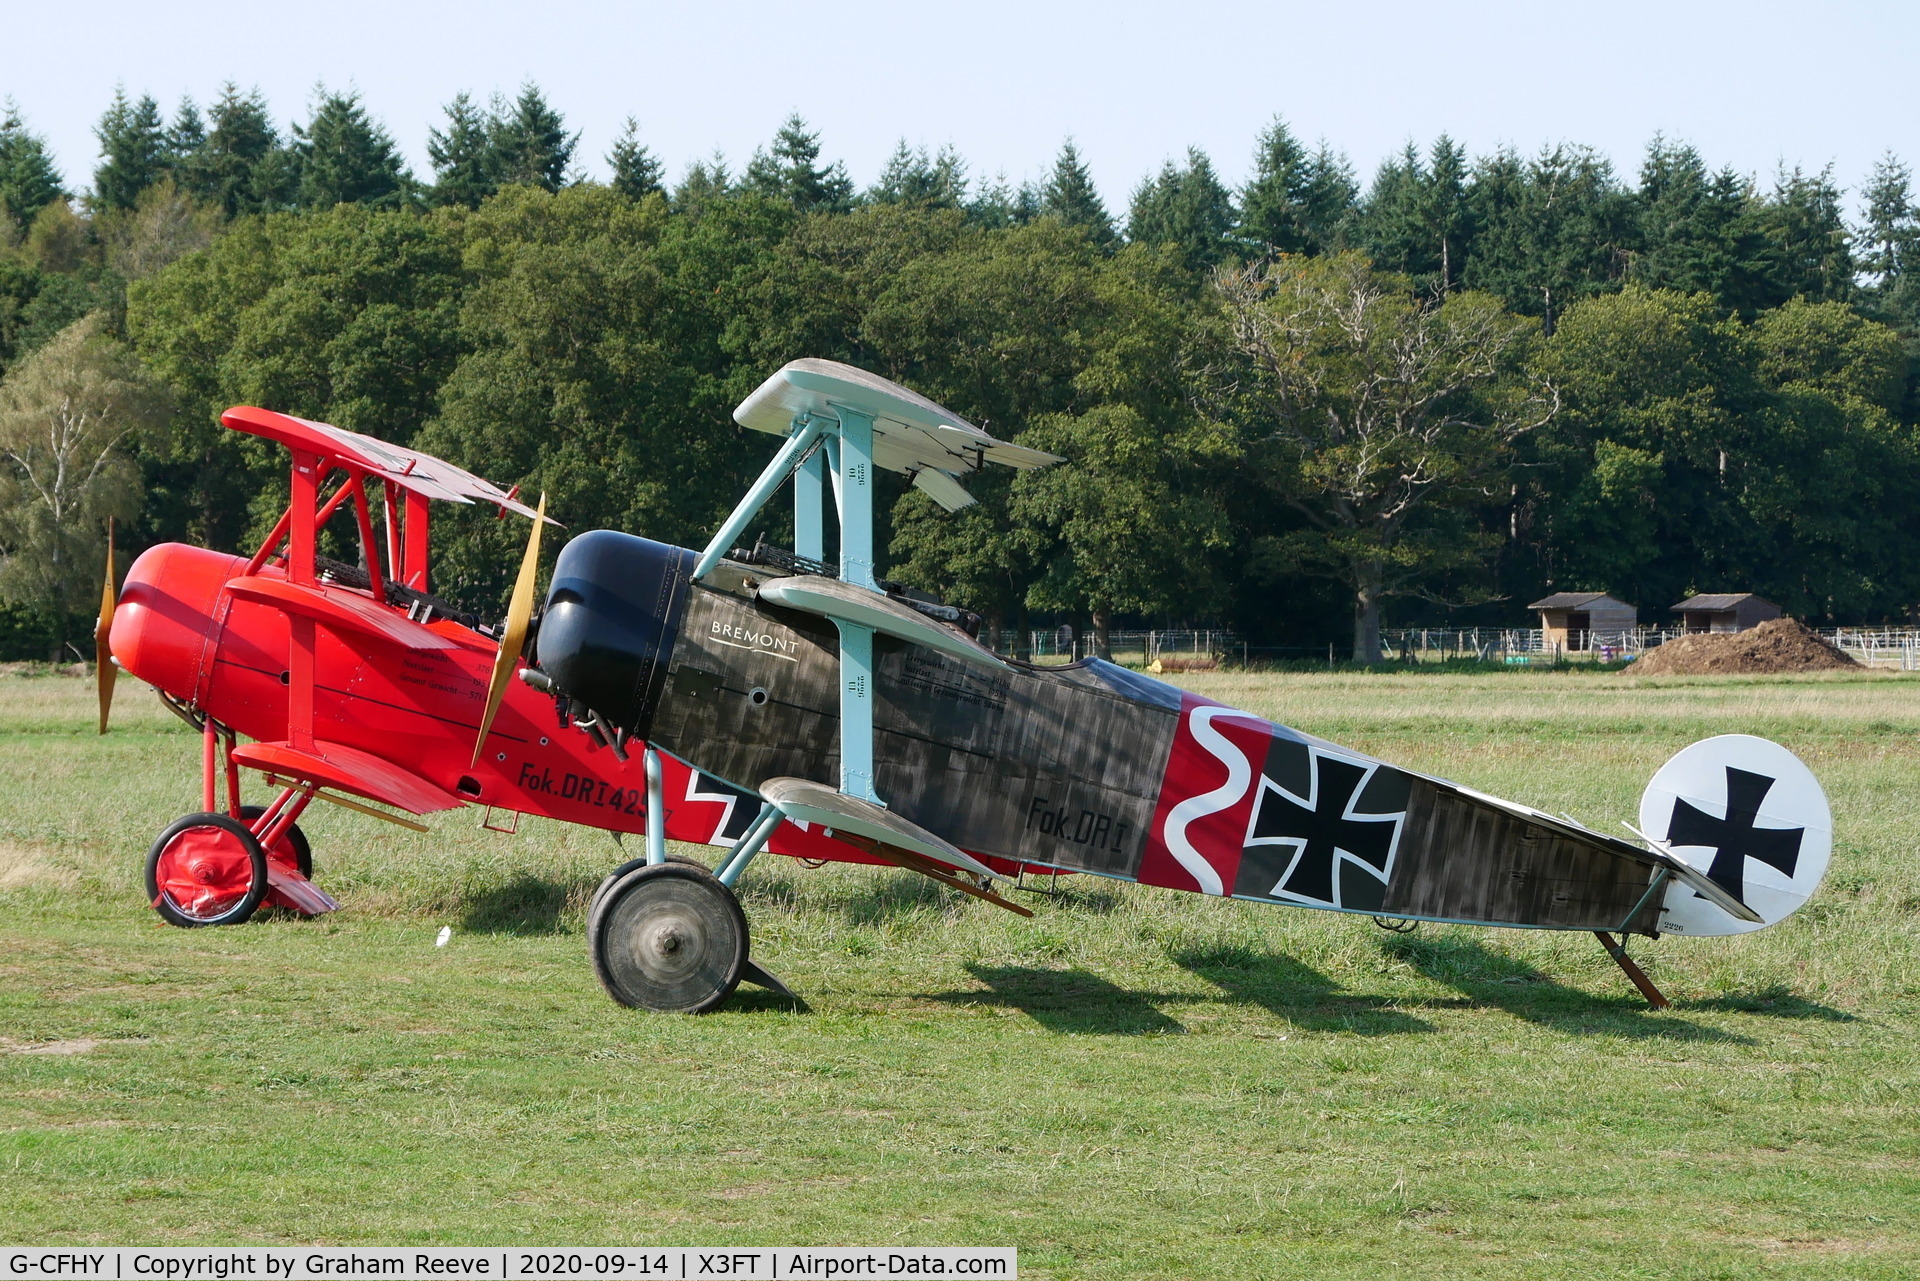 G-CFHY, 2010 Fokker Dr.1 Triplane Replica C/N PFA 238-14408, Parked at Felthorpe, with G-DREI parked behind,